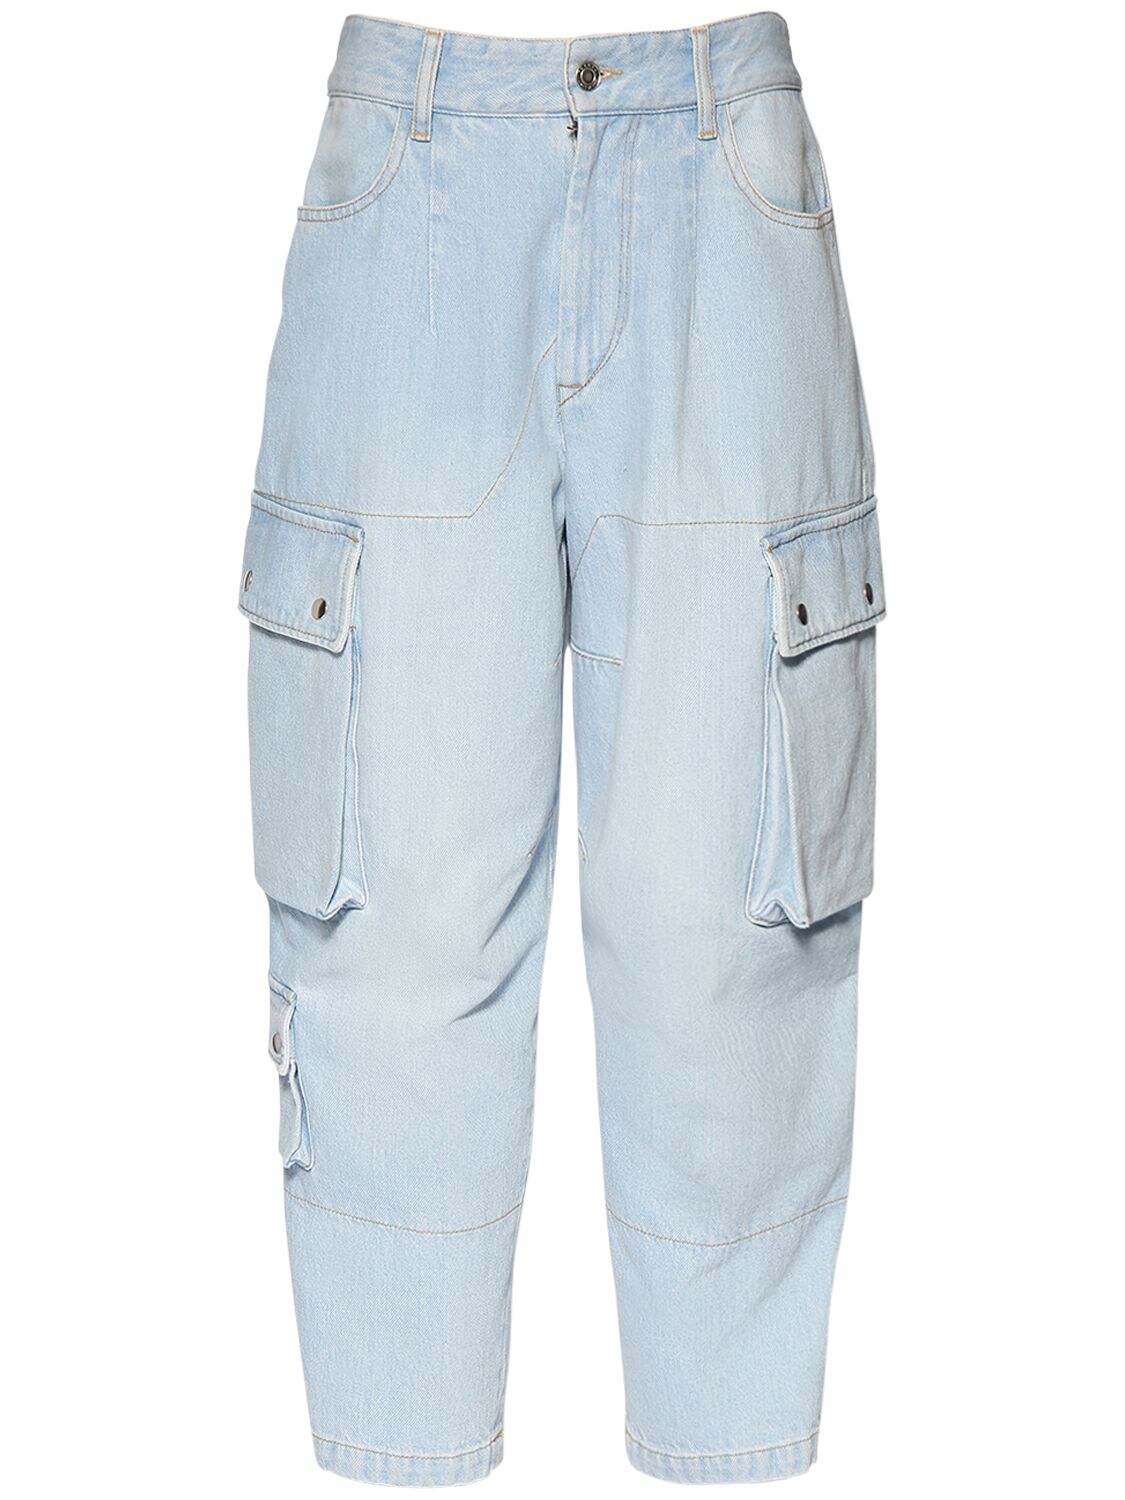 Isabel Marant Elore Cotton Wide Pants W/ Patch Pockets In Light Blue